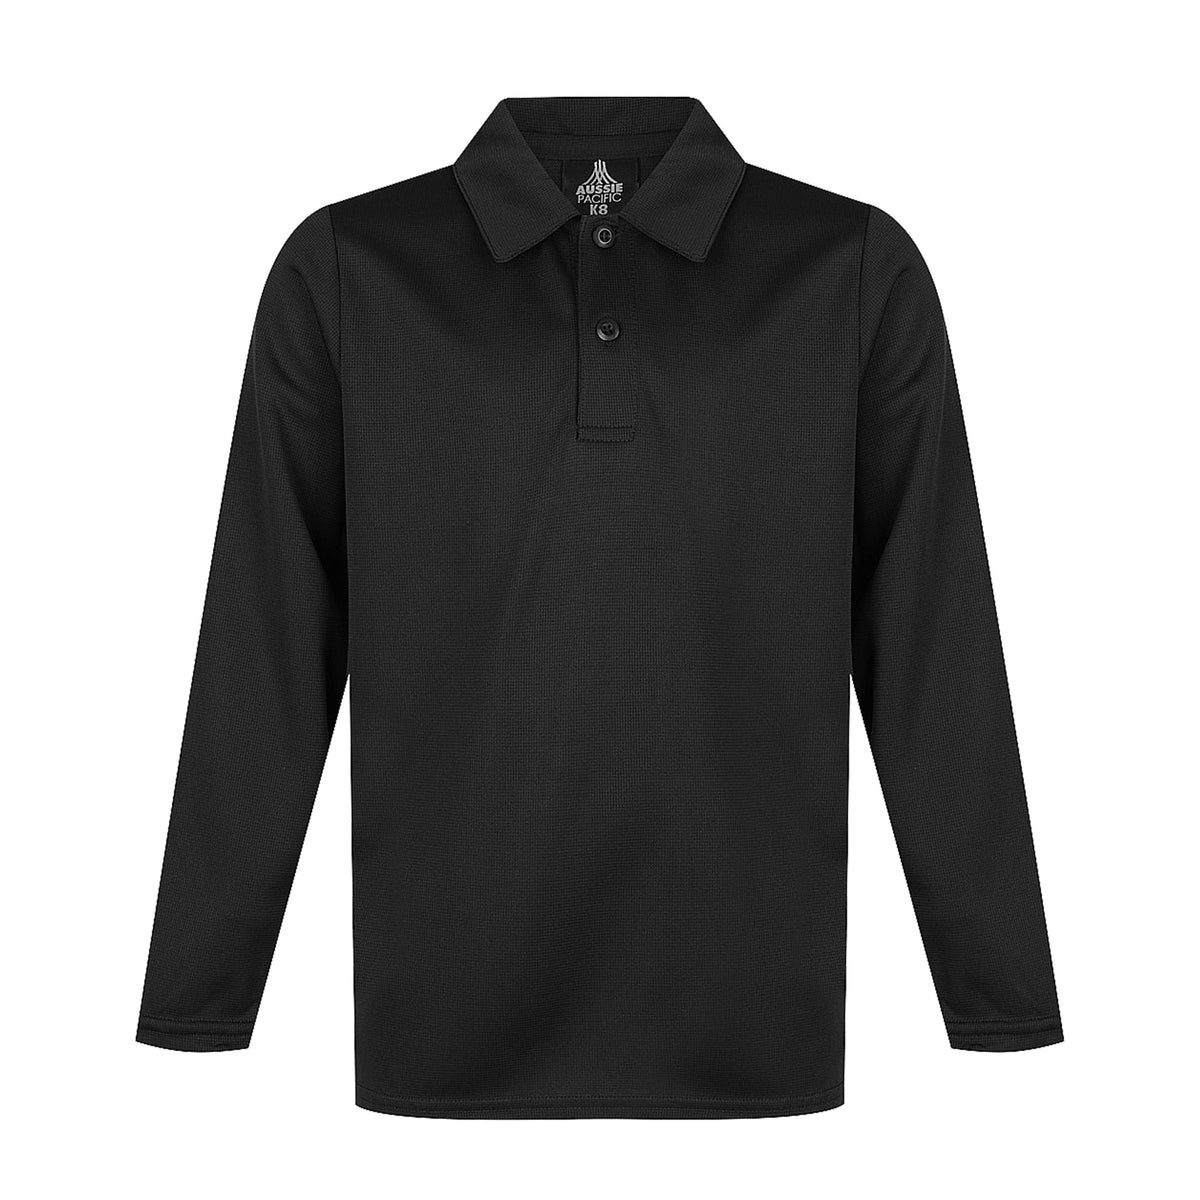 aussie pacific botany kids polo long sleeve in black